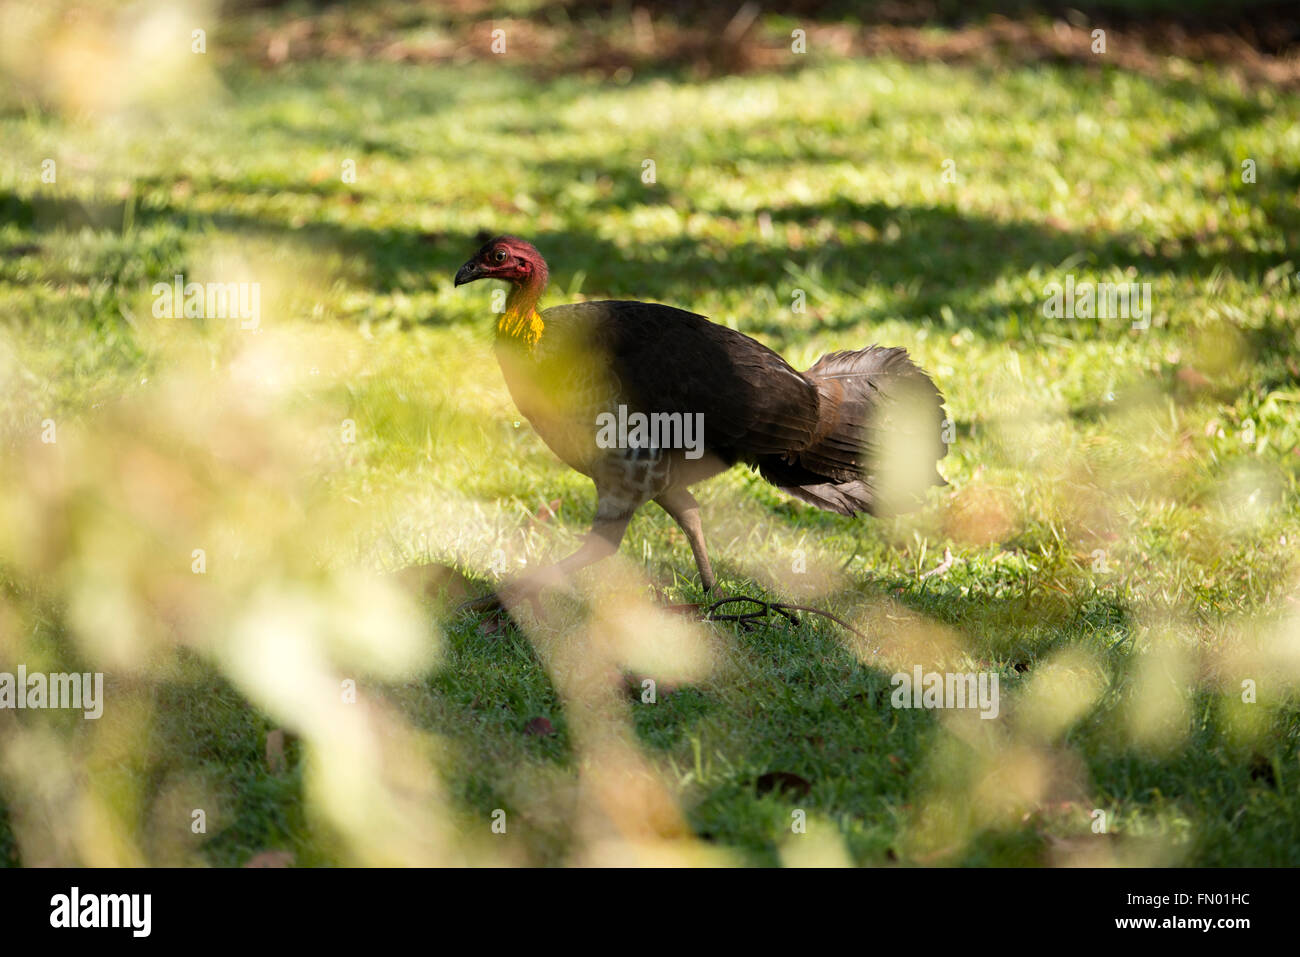 An Australian Brush Turkey, also known as a Scrub turkey, Bush turkey, are a common sight in Queensland, Australia.  It is regarded as a pest for Stock Photo